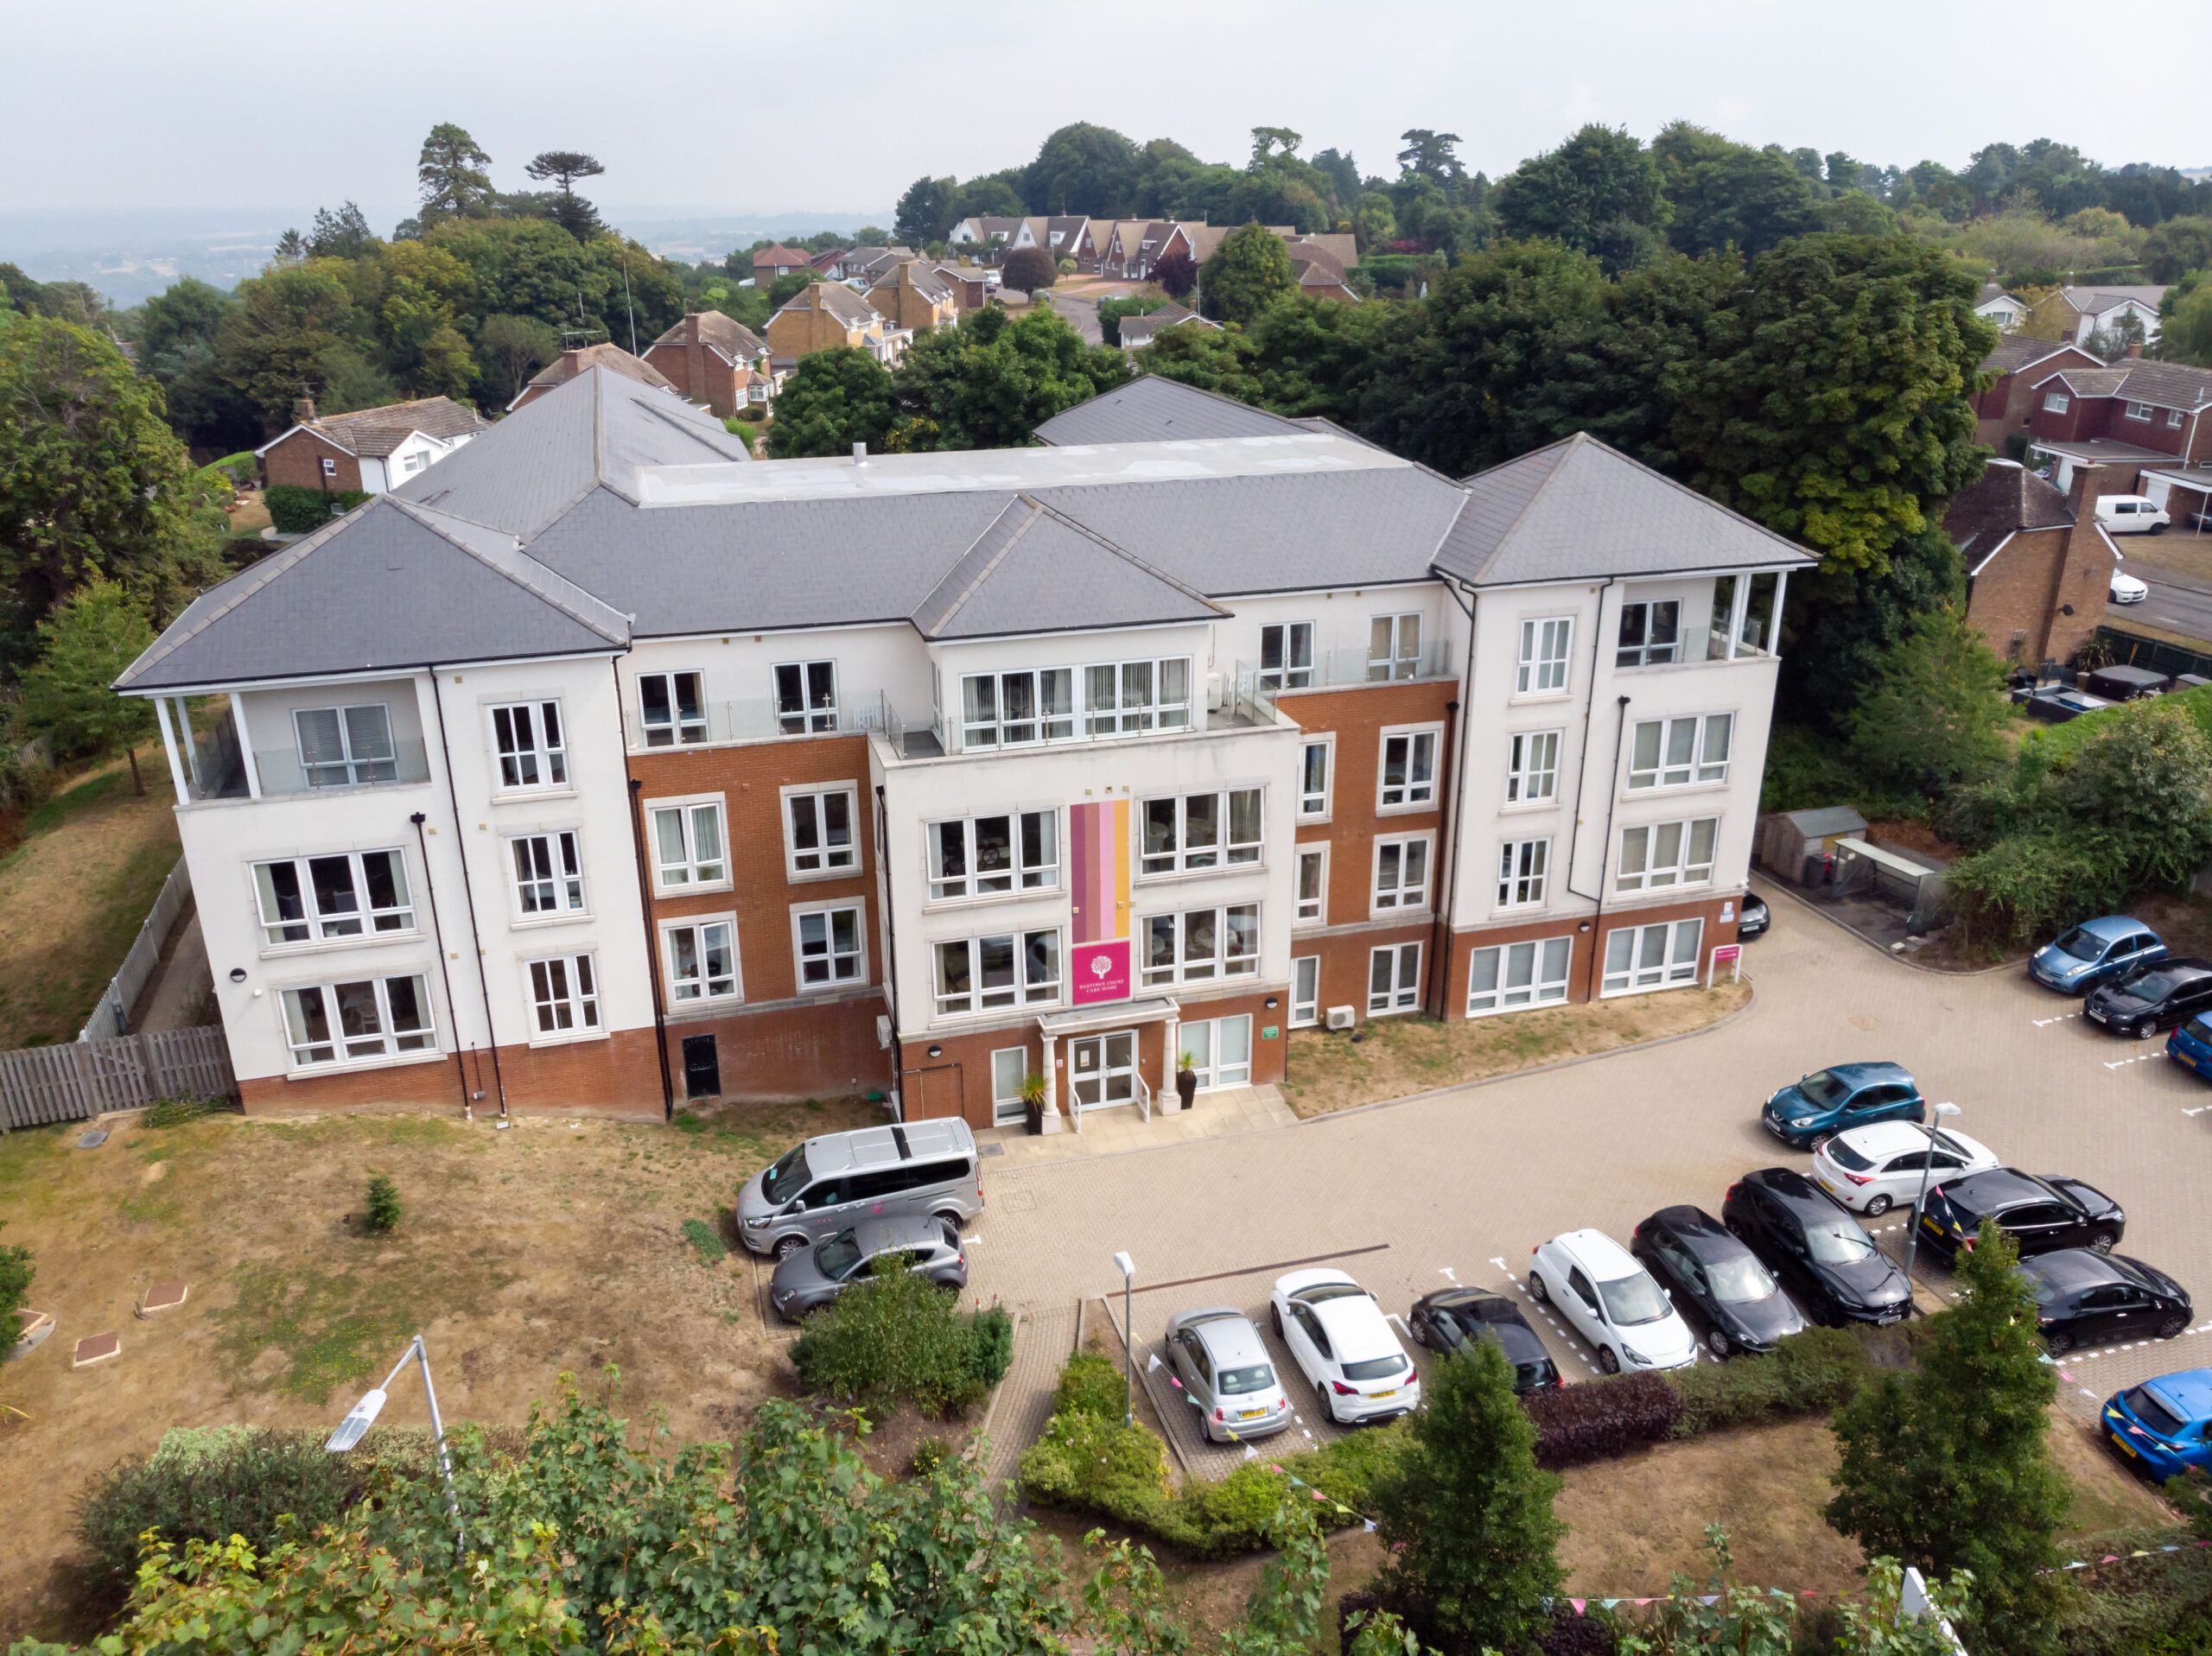 Outside aerial view of Hastings Court Care Home in East Sussex